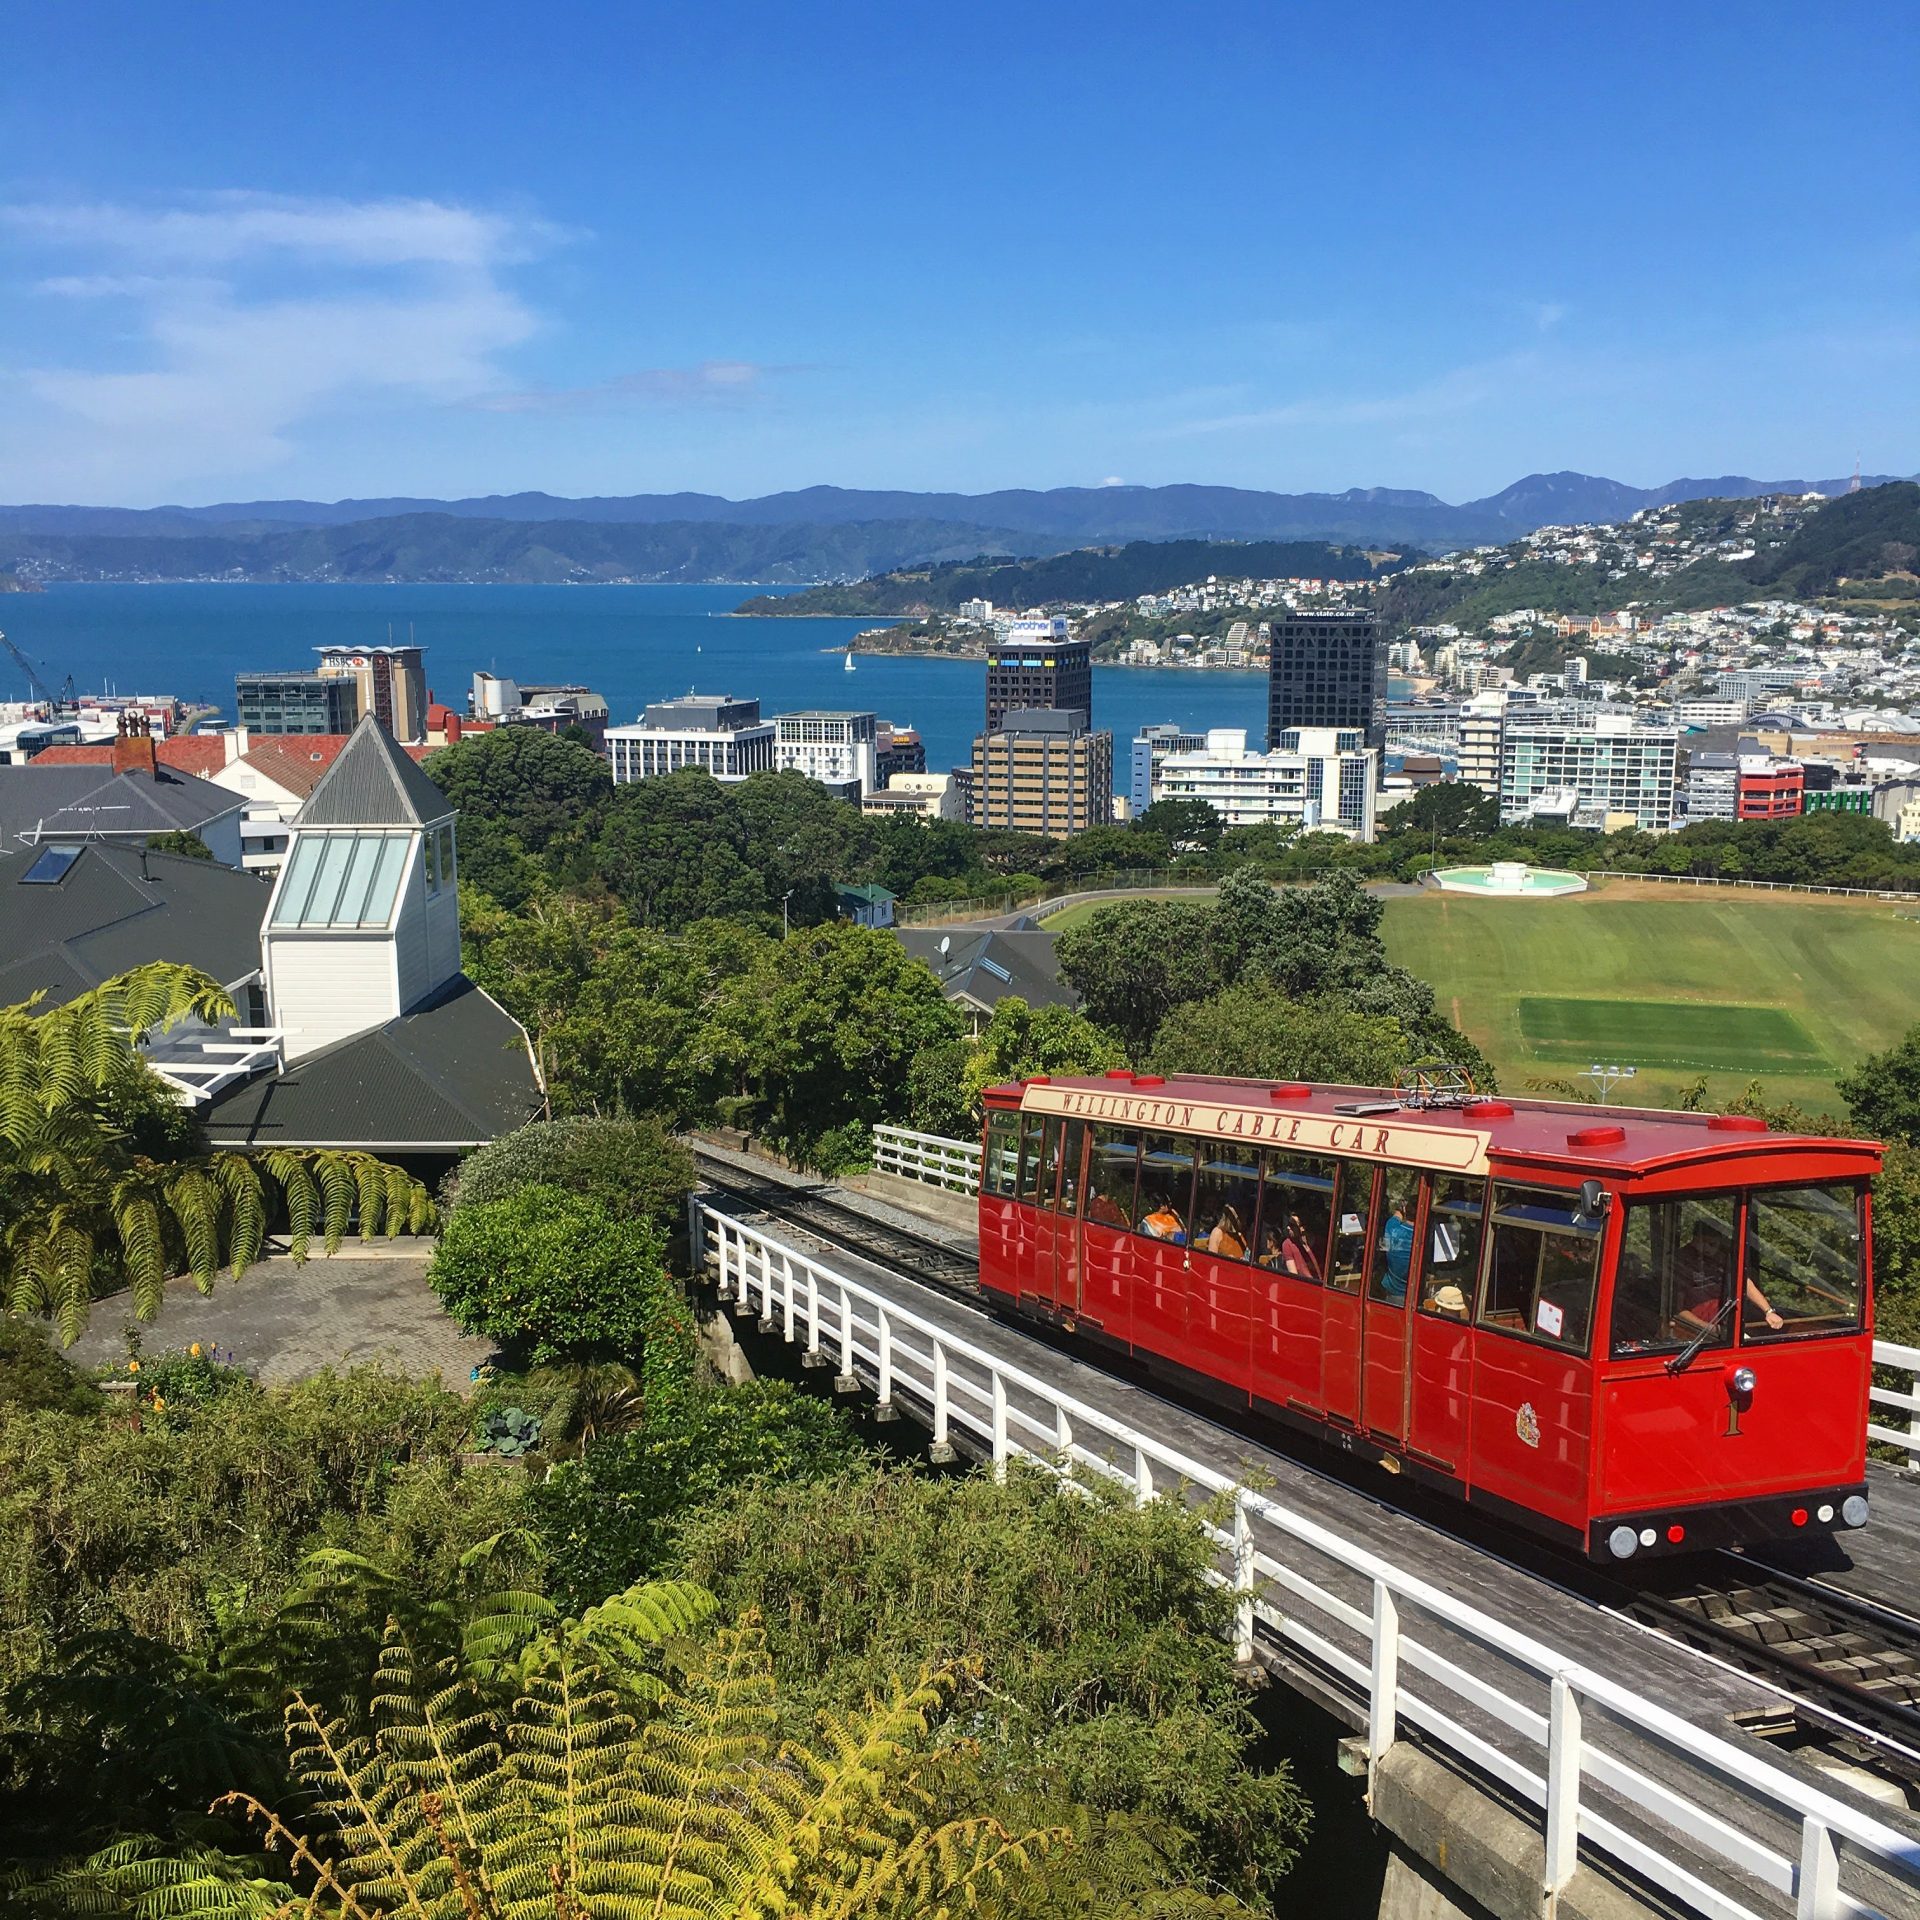 wellington cable car - Travel Contests: May 13th, 2020 - New Zealand, Bali, Amsterdam, & more